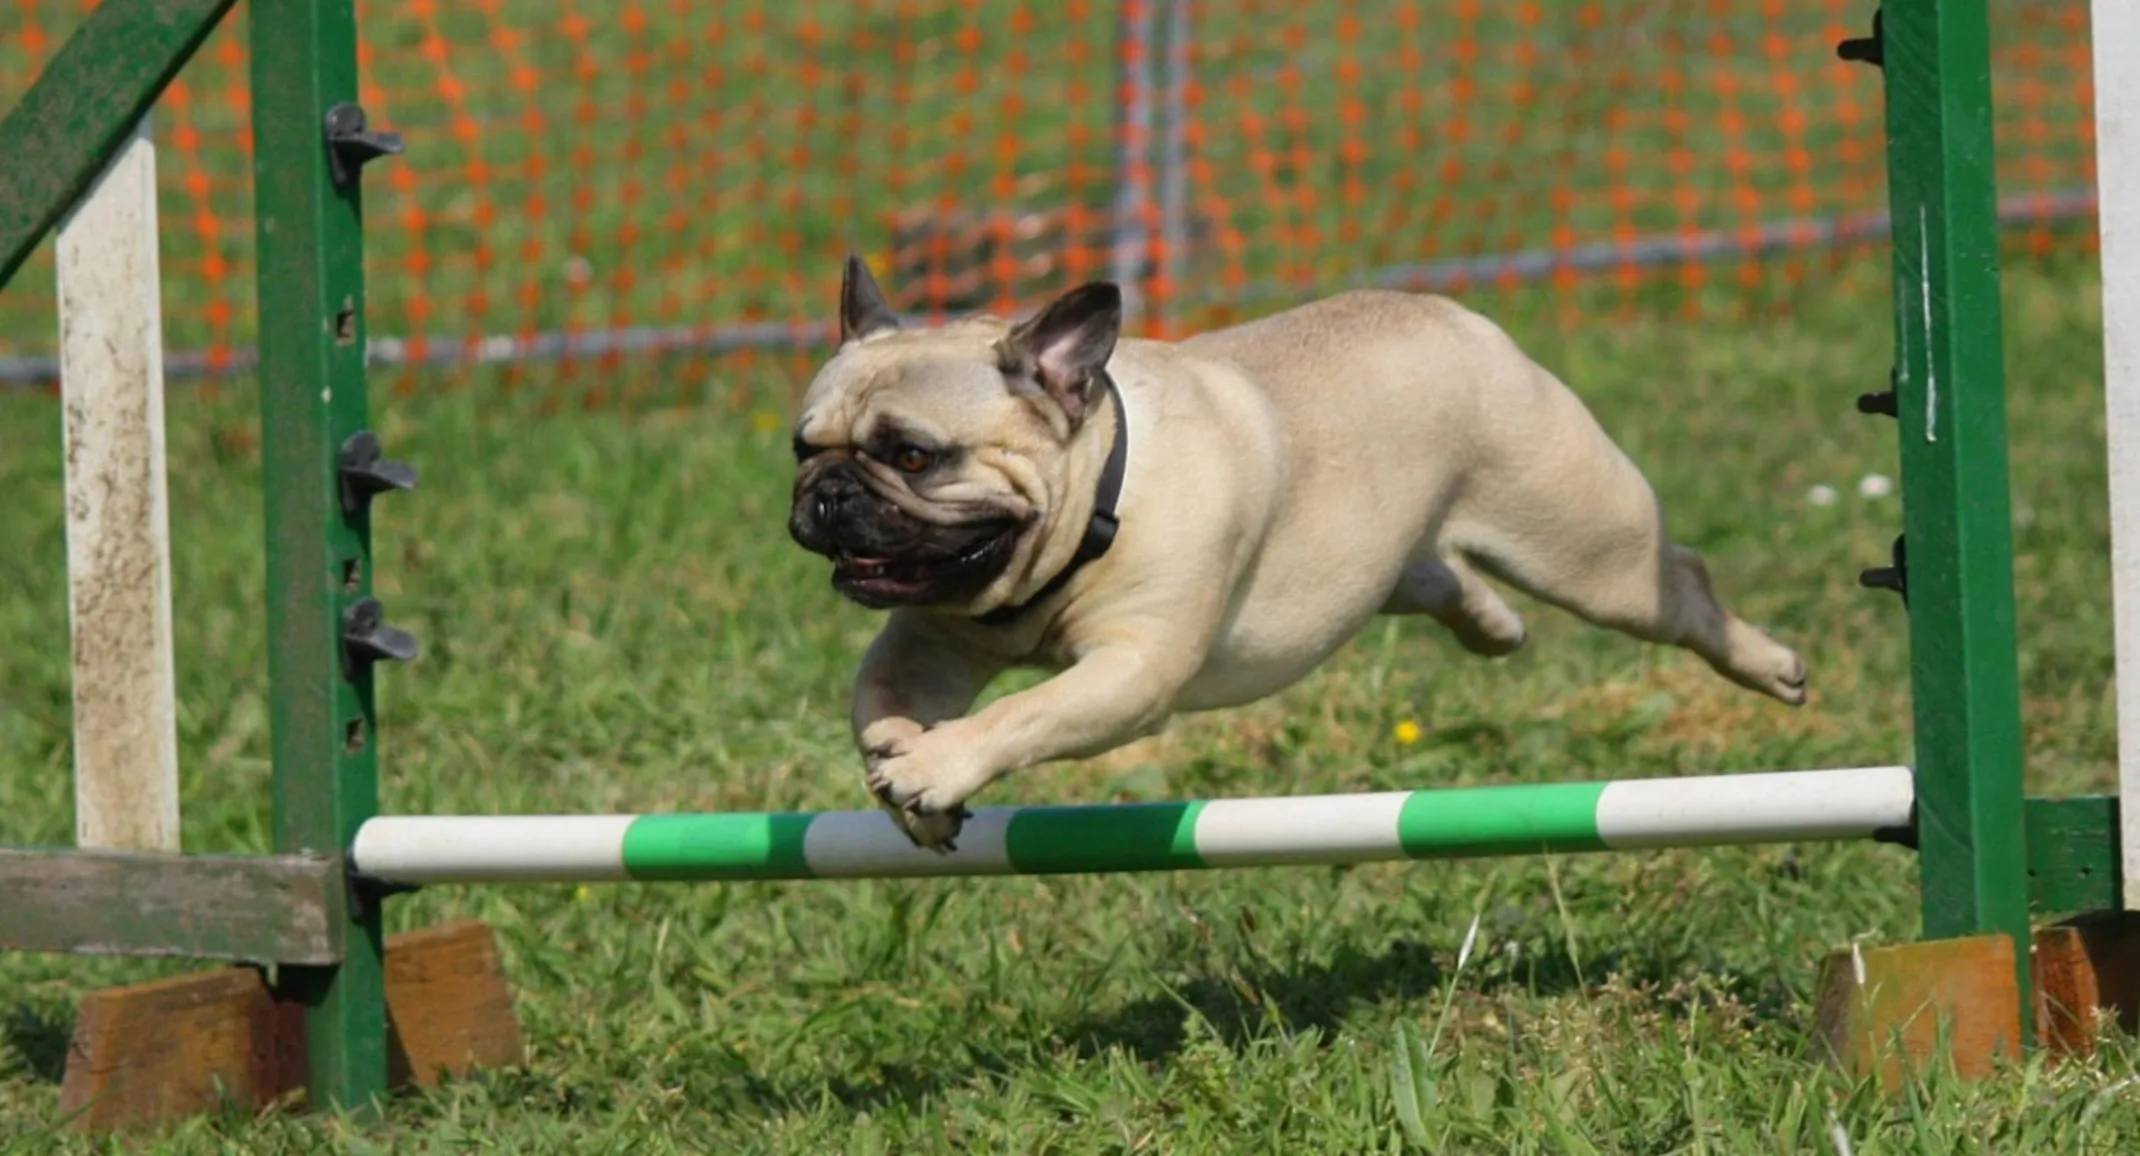 A Pug (Dog) Jumping Over a Training Obstacle Stick